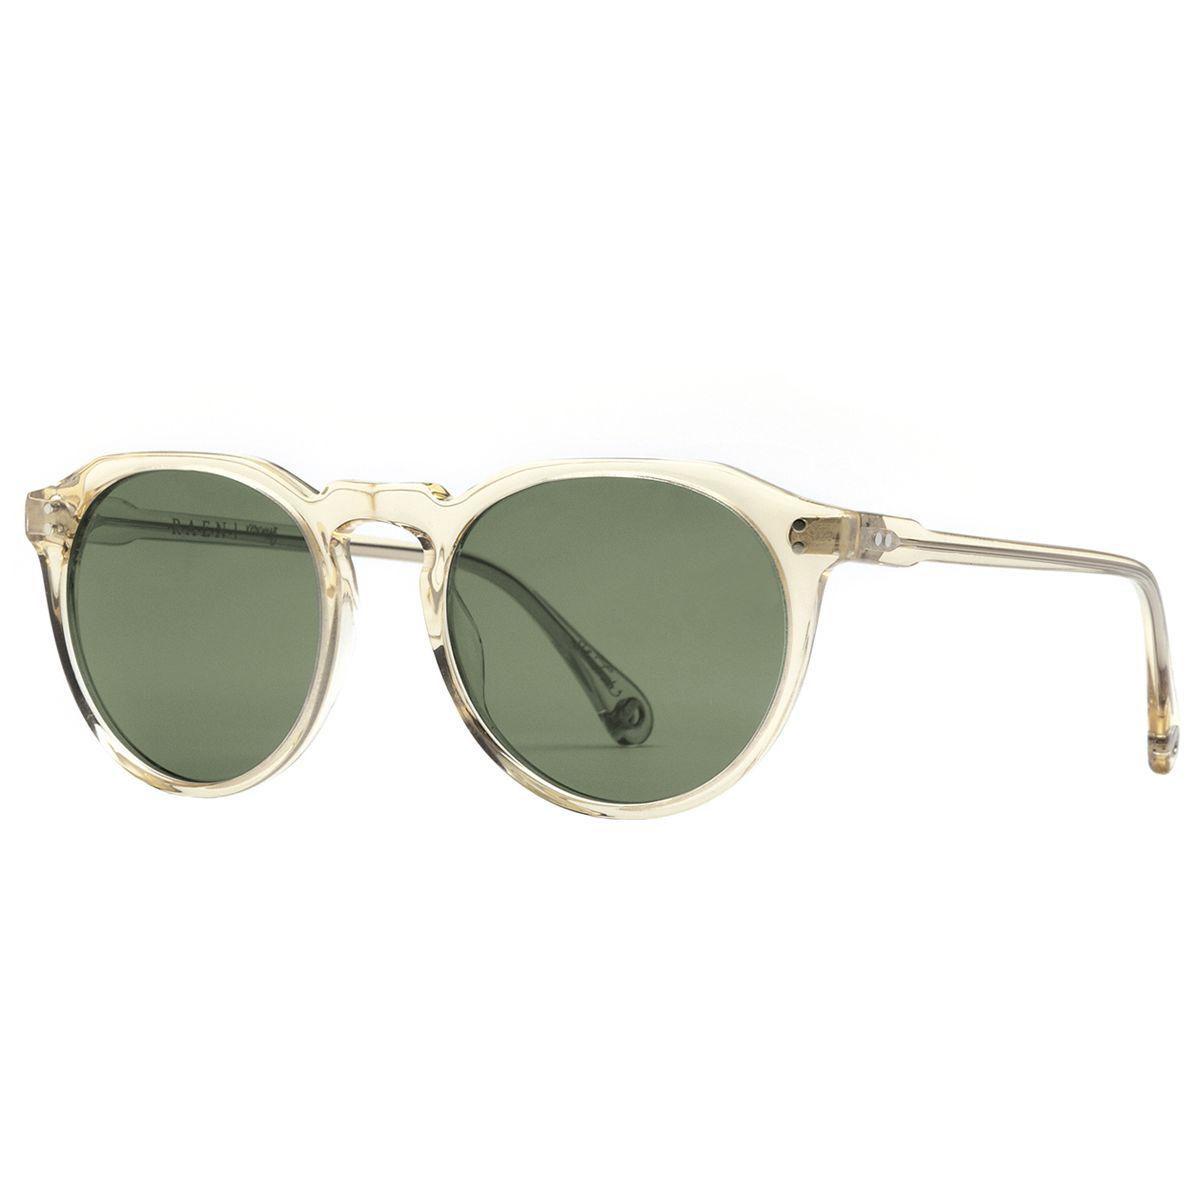 Raen Remmy 49 Sunglasses - Polarized in Champagne Crystal/Green (Green ...